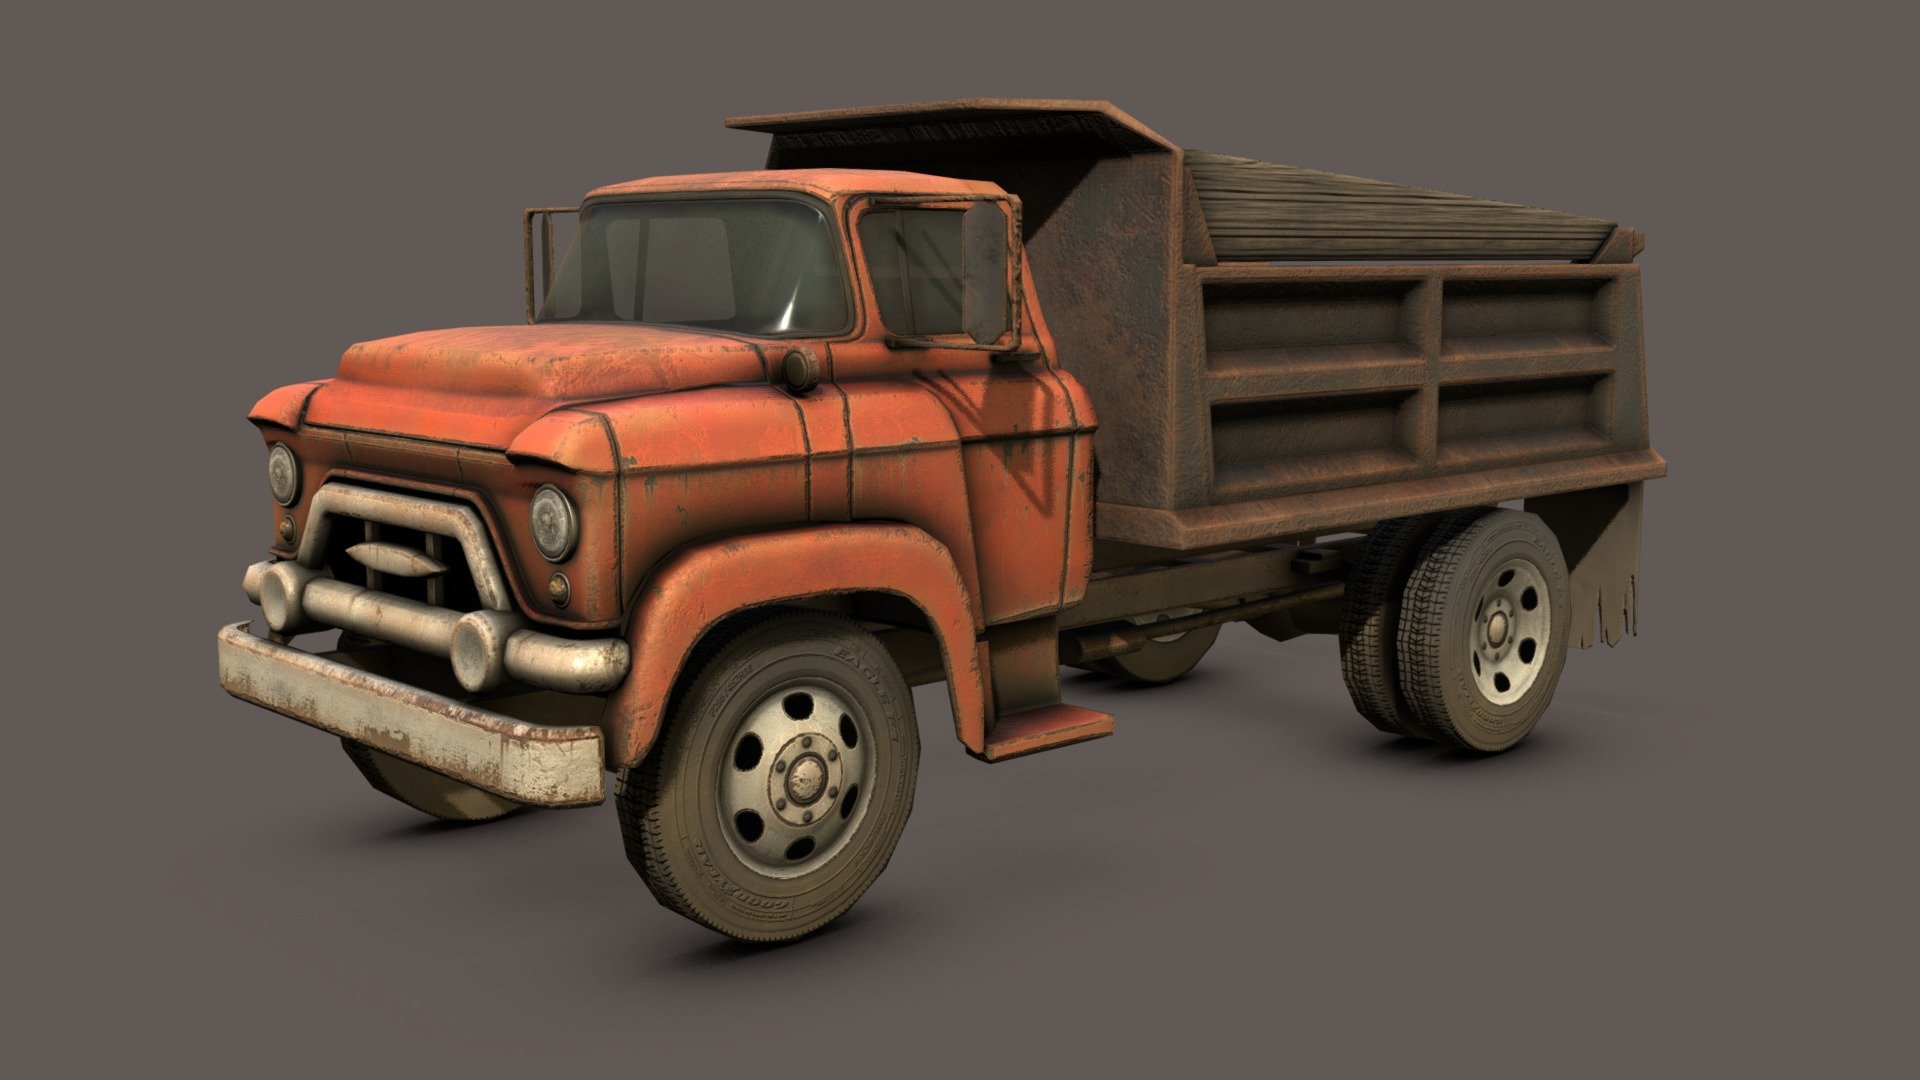 Dump truck version of my 1957 truck model, it's &ldquo;finished